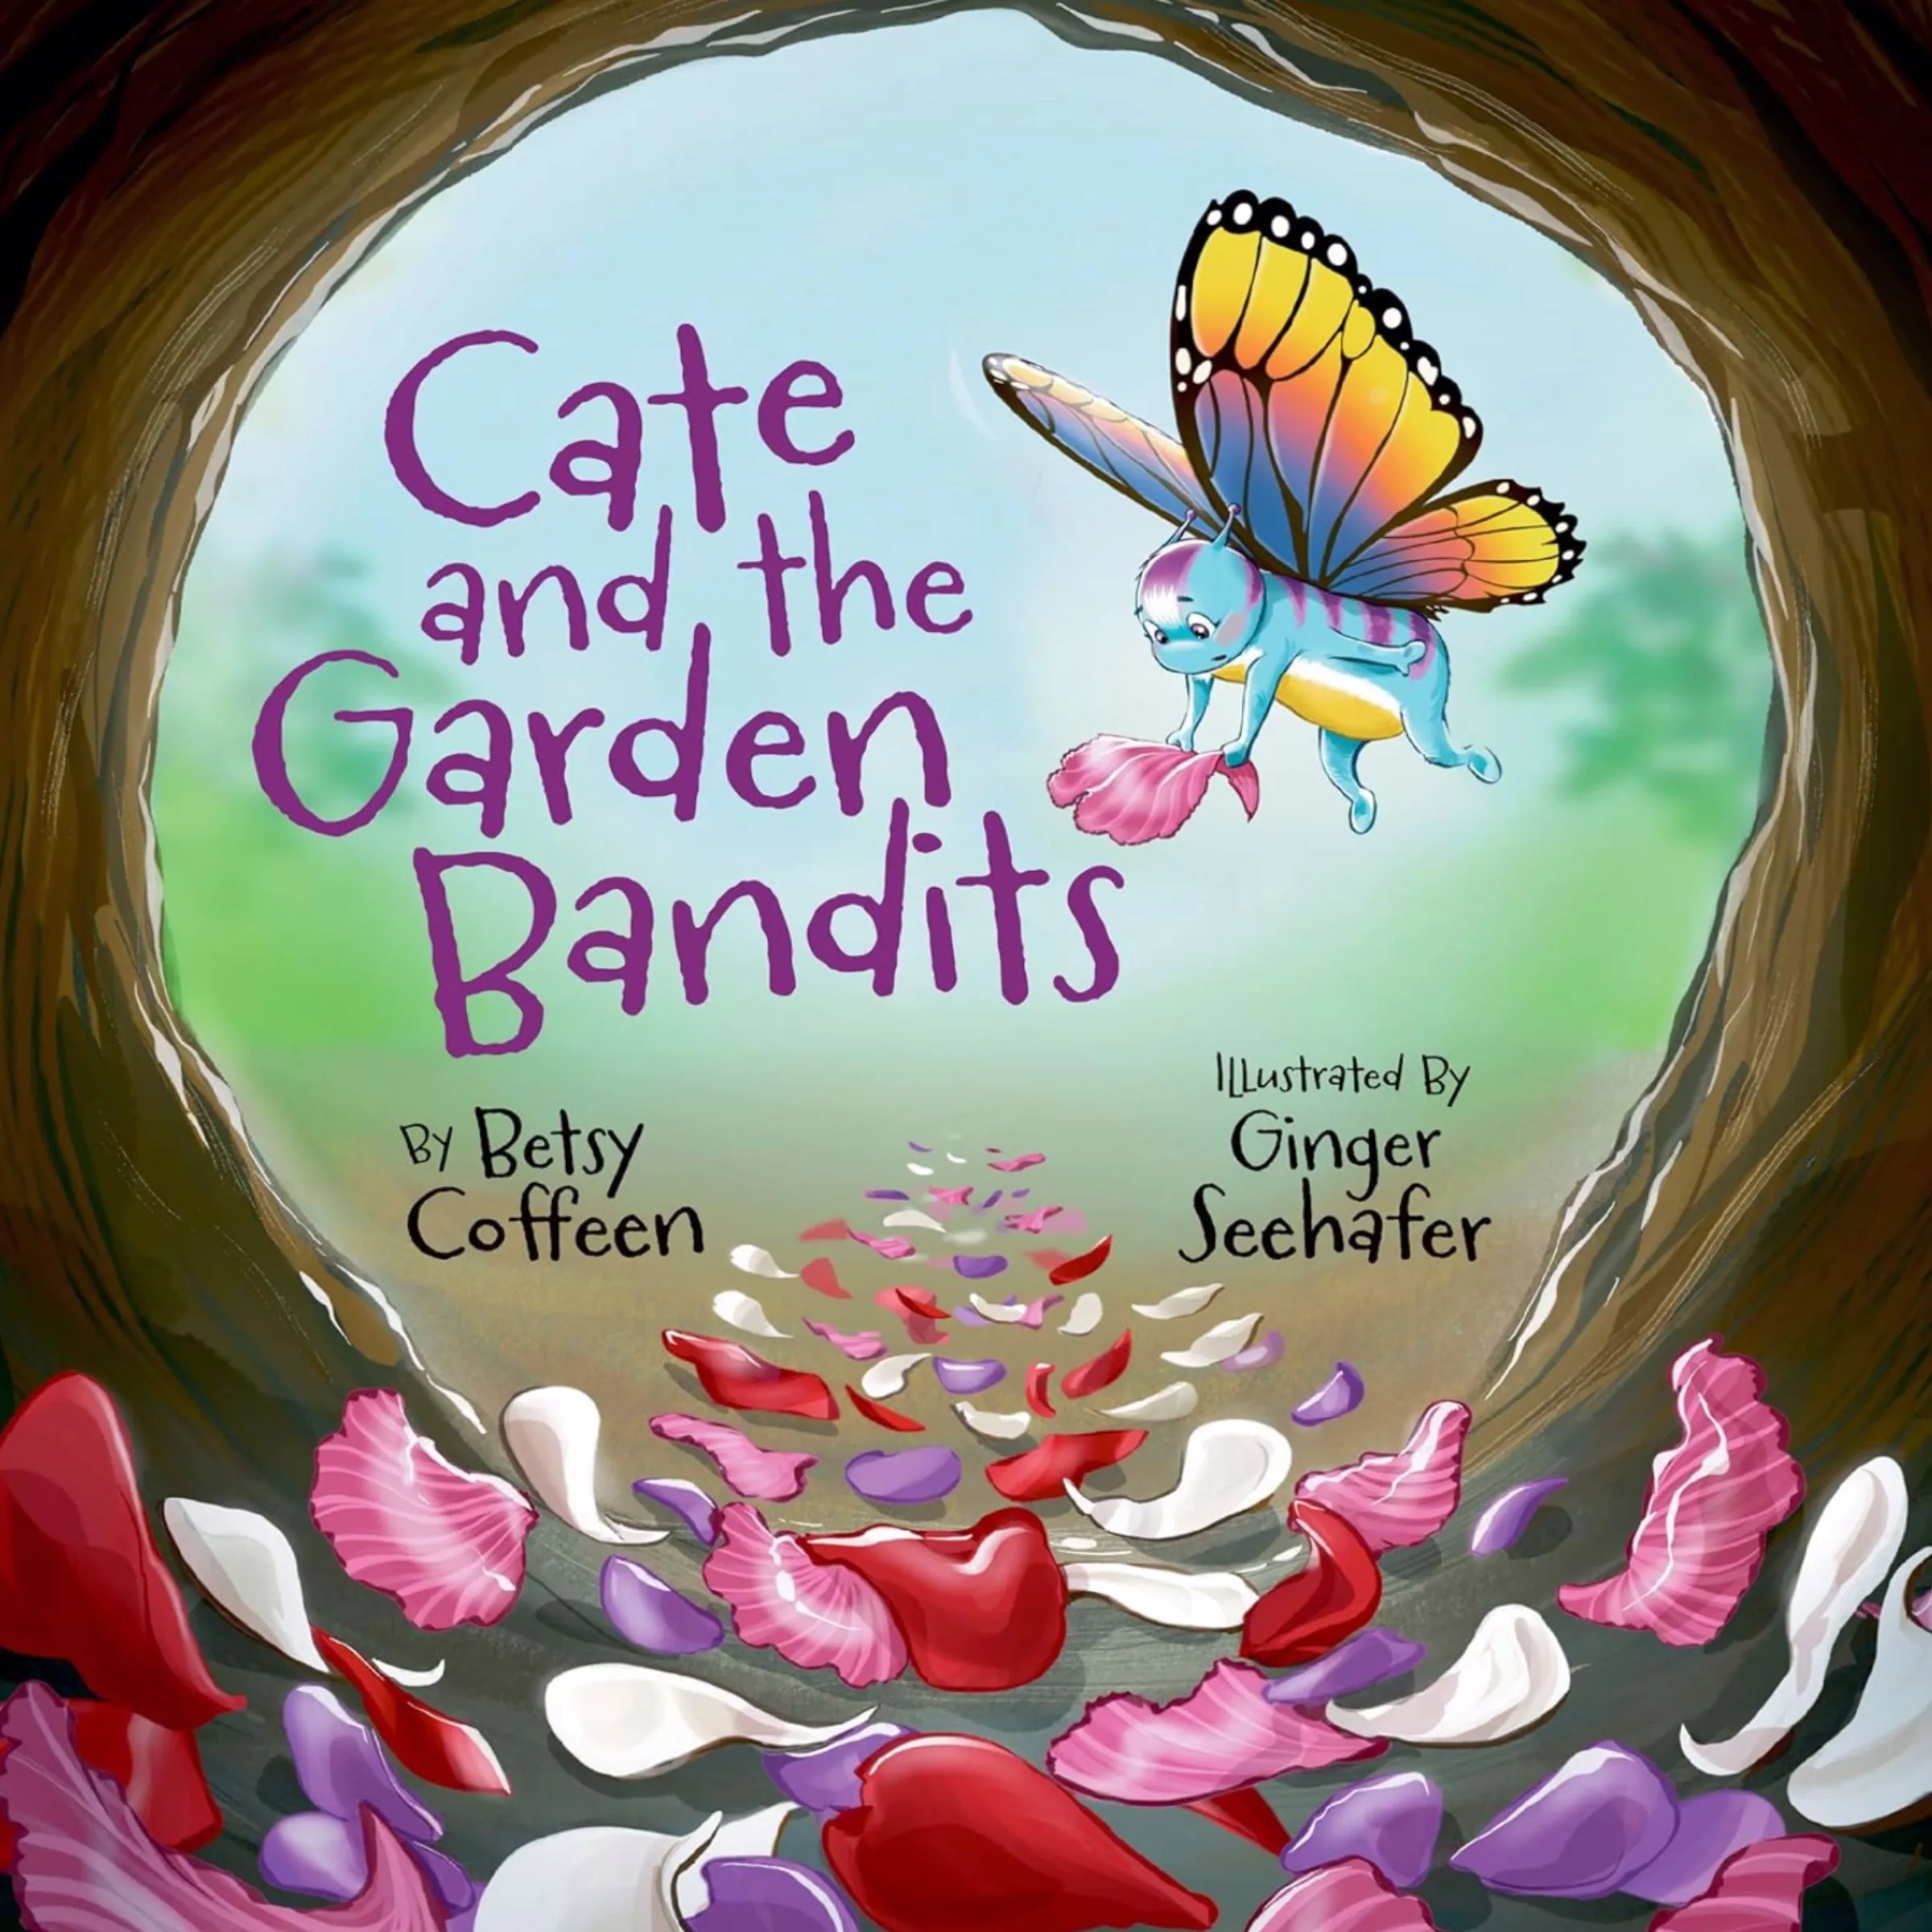 Cate and the Garden Bandits by Betsy Coffeen Audiobook